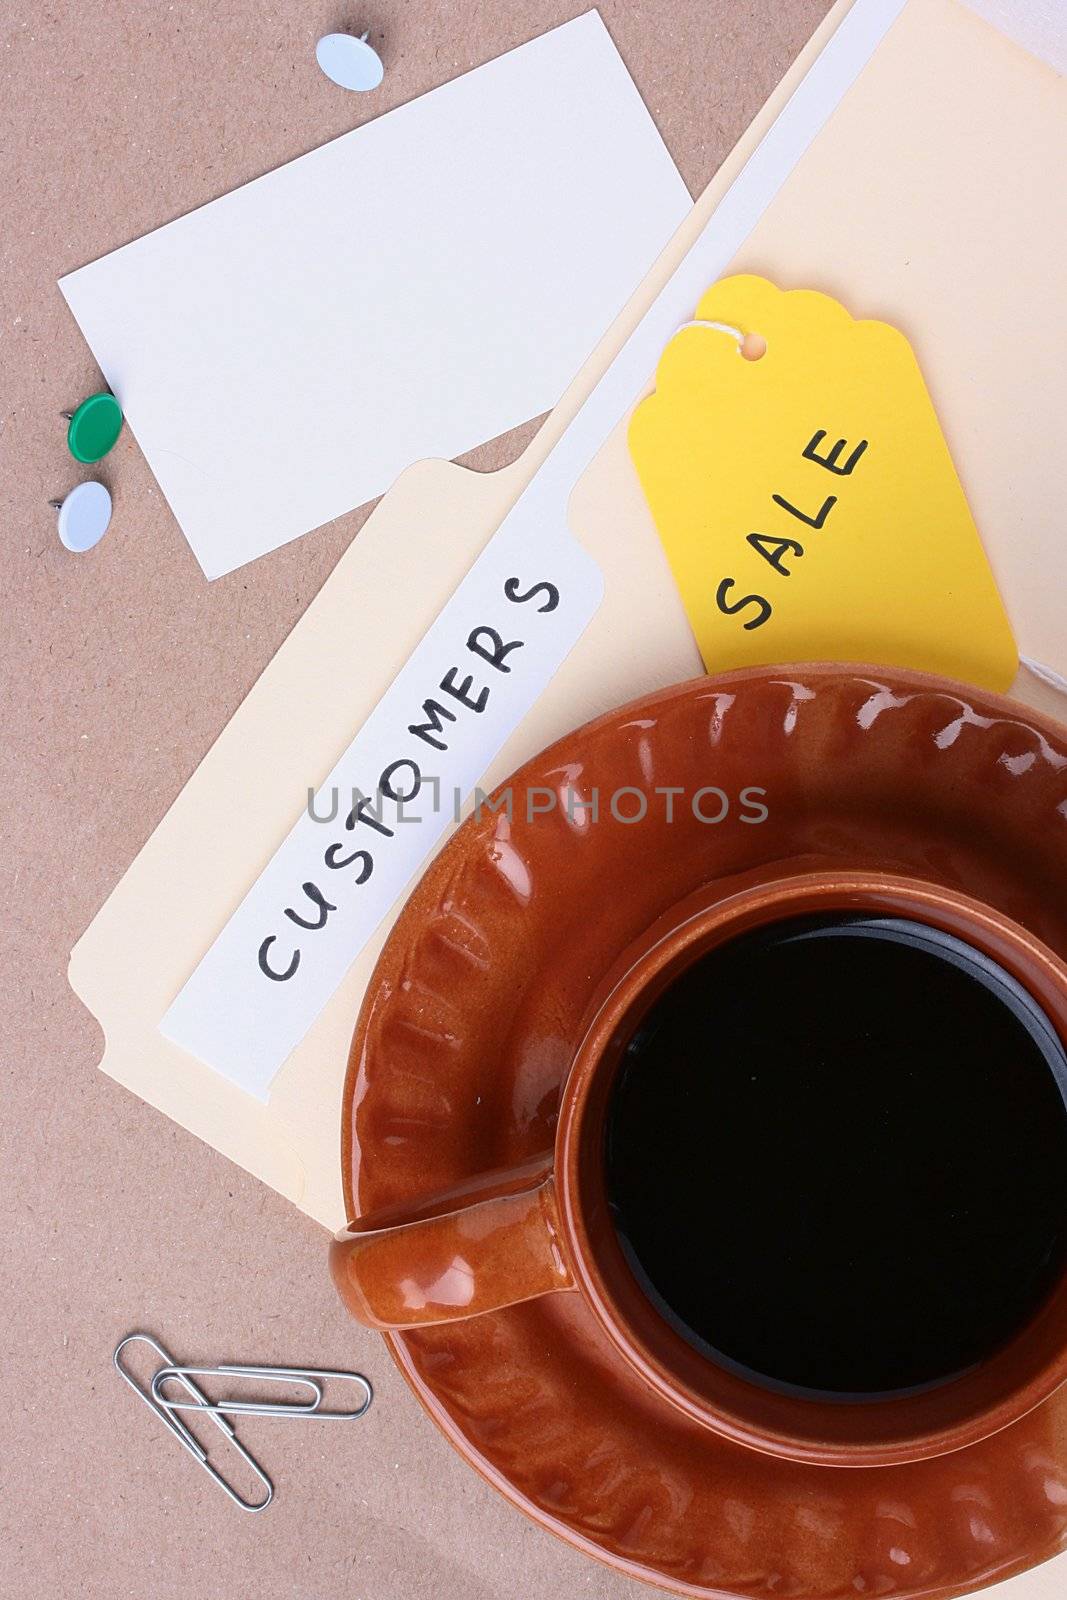 A manila customers folder laying next to a cup of coffee and office supplies. Add your text to the business card.